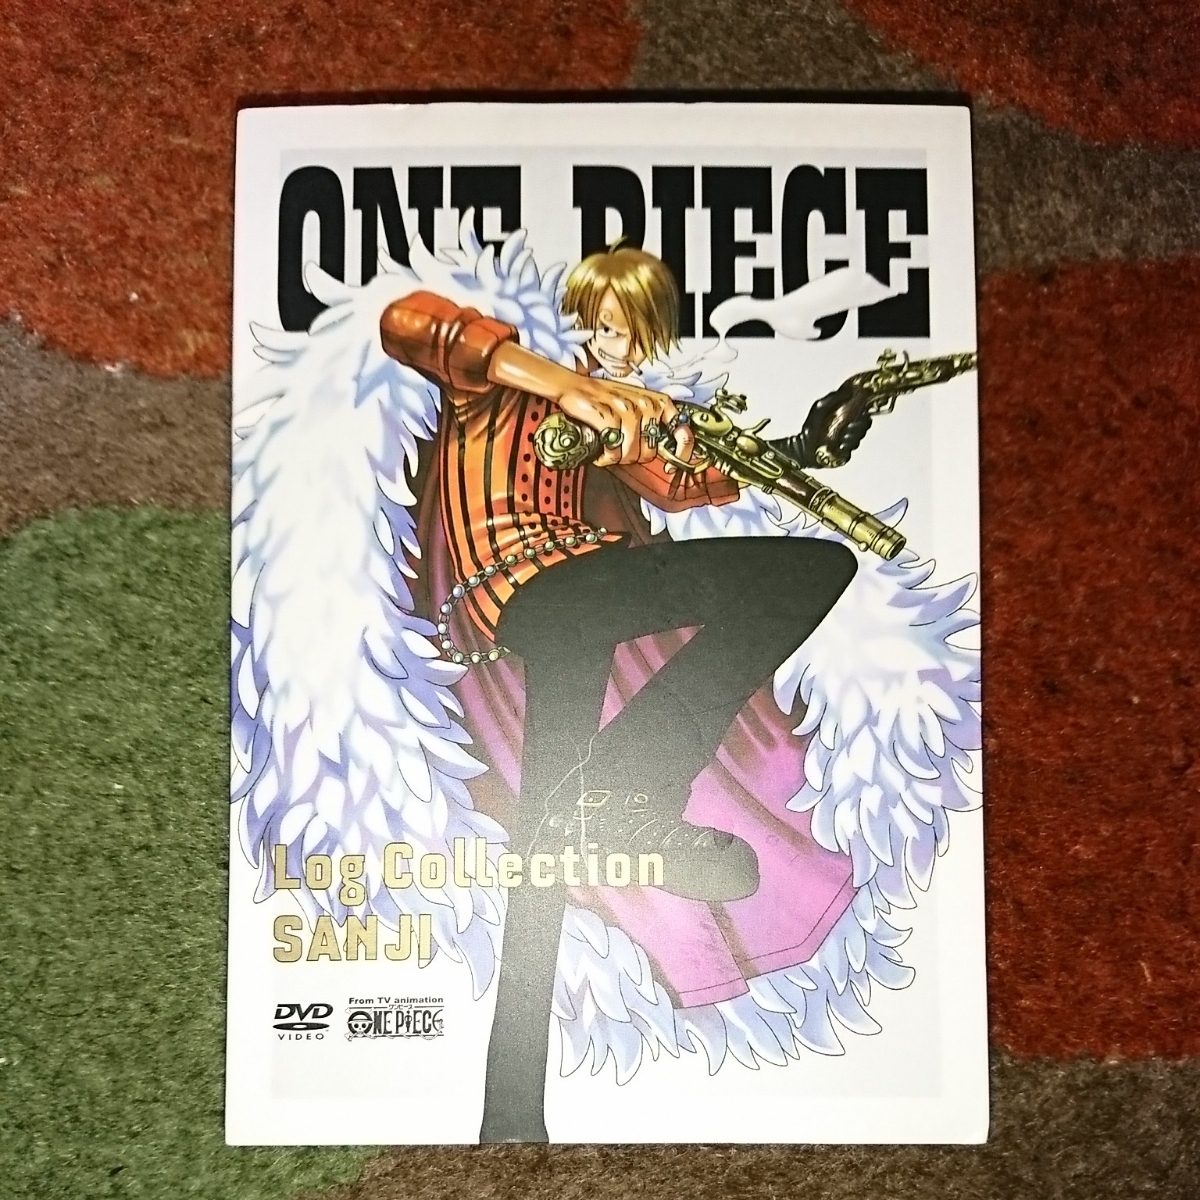 One Piece Log Collection Sanji One Piece Dvd Operation Verification Ending Real Yahoo Auction Salling